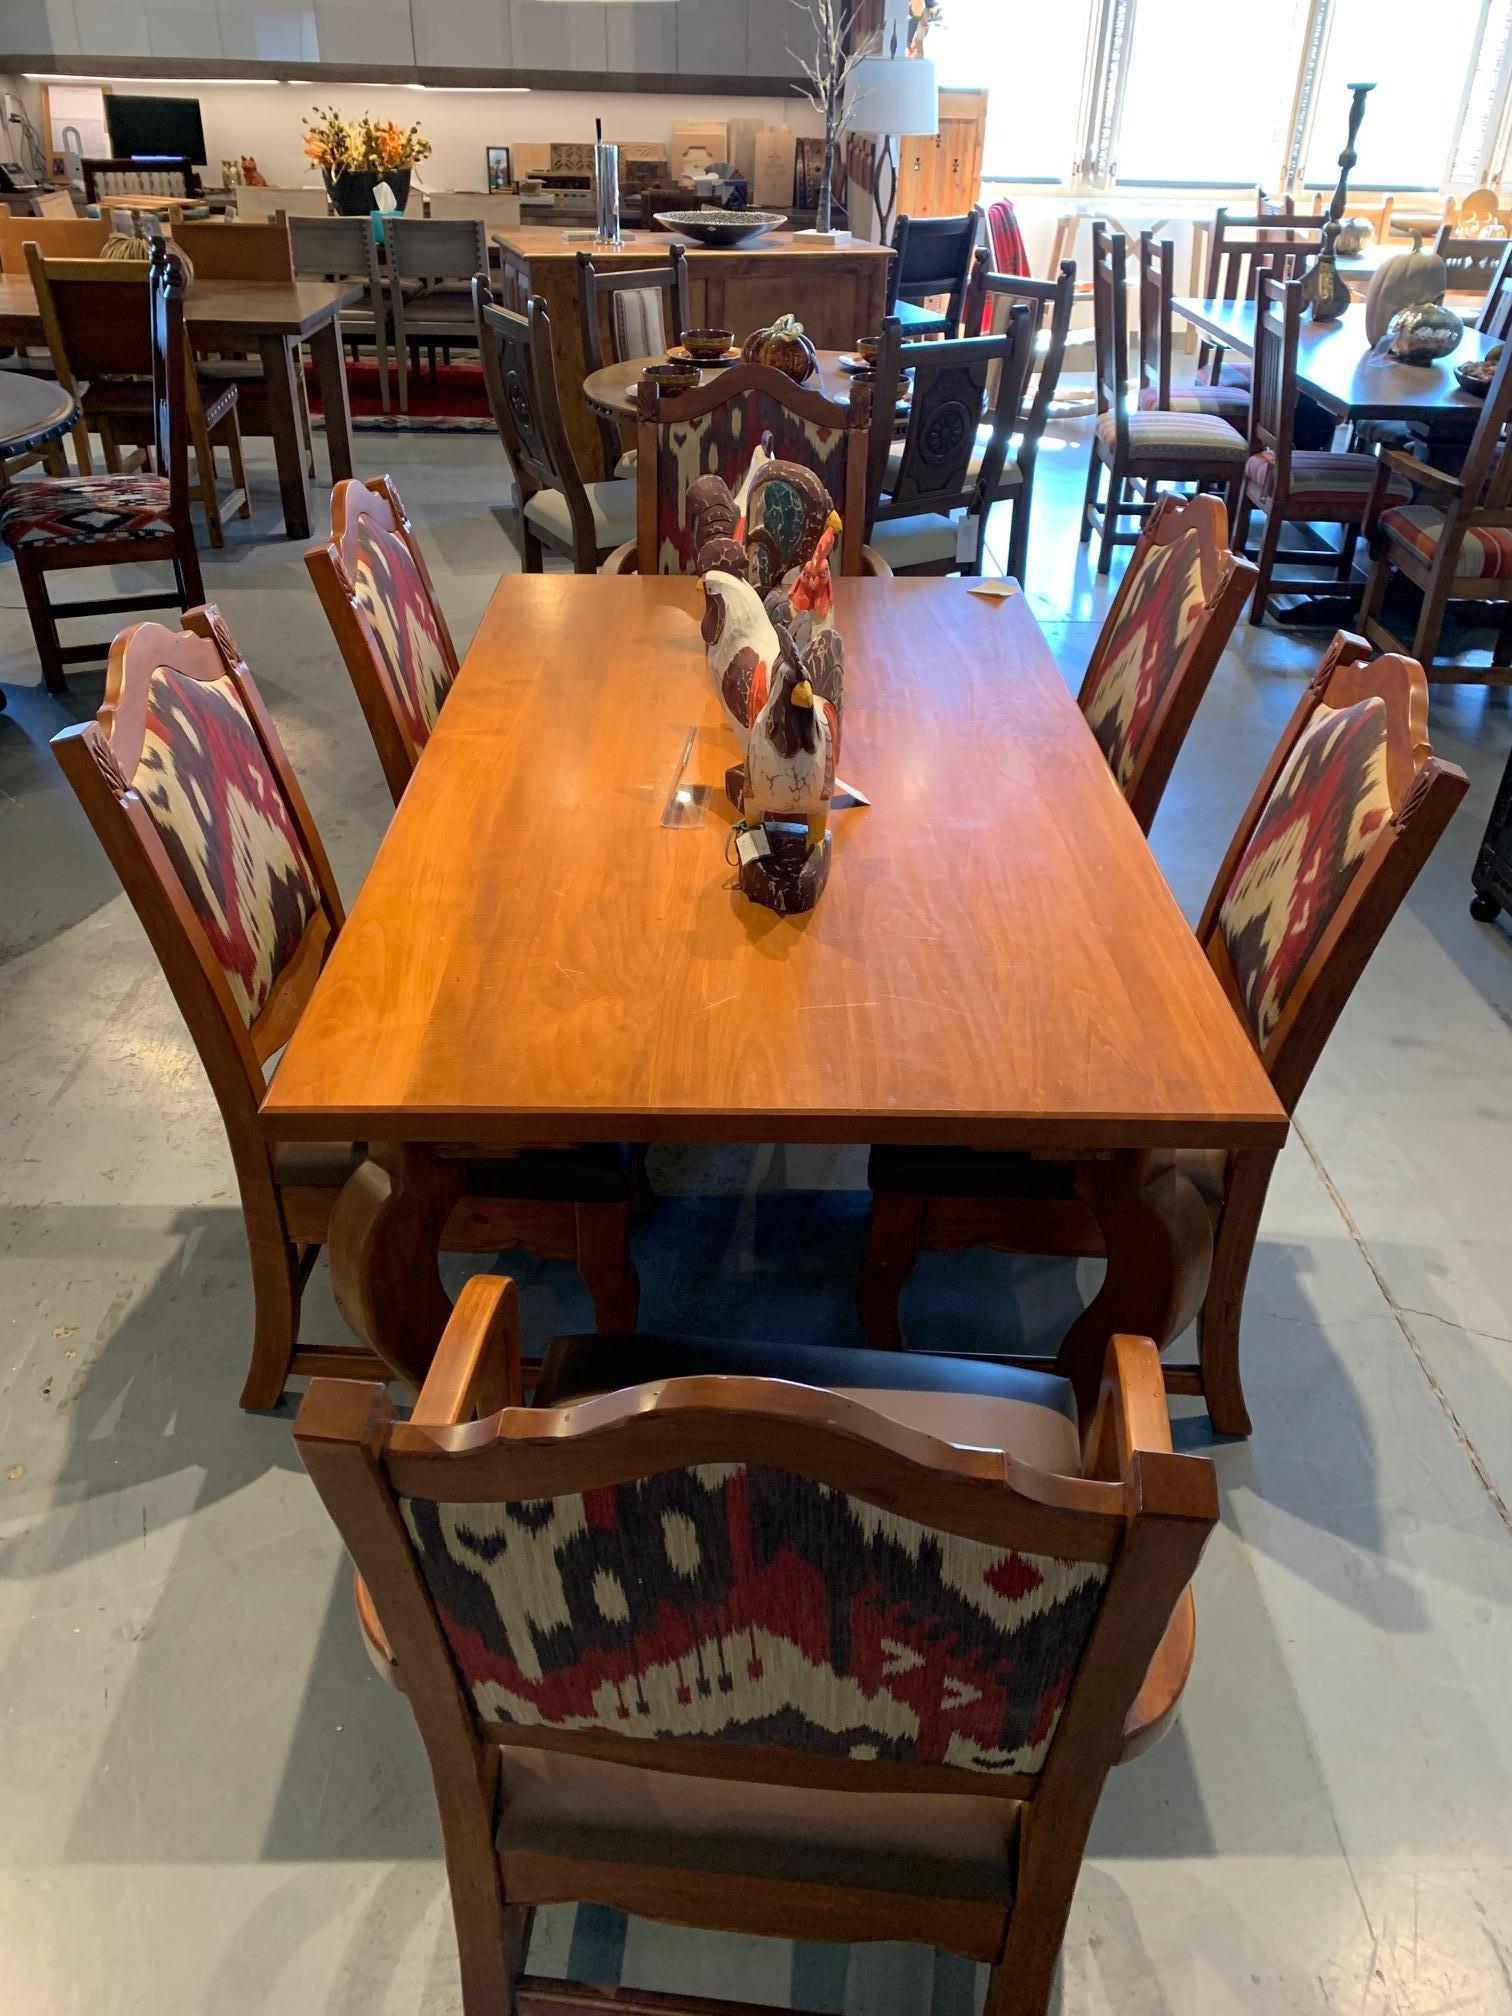 Tuscan Side Dining Chairs with carving and fully upholstered.
Table and Arm Chairs (arm chairs shown in picture and listed separately) are on our storefront as well to complete the set. Table and chairs are not a matching set.

These are showroom